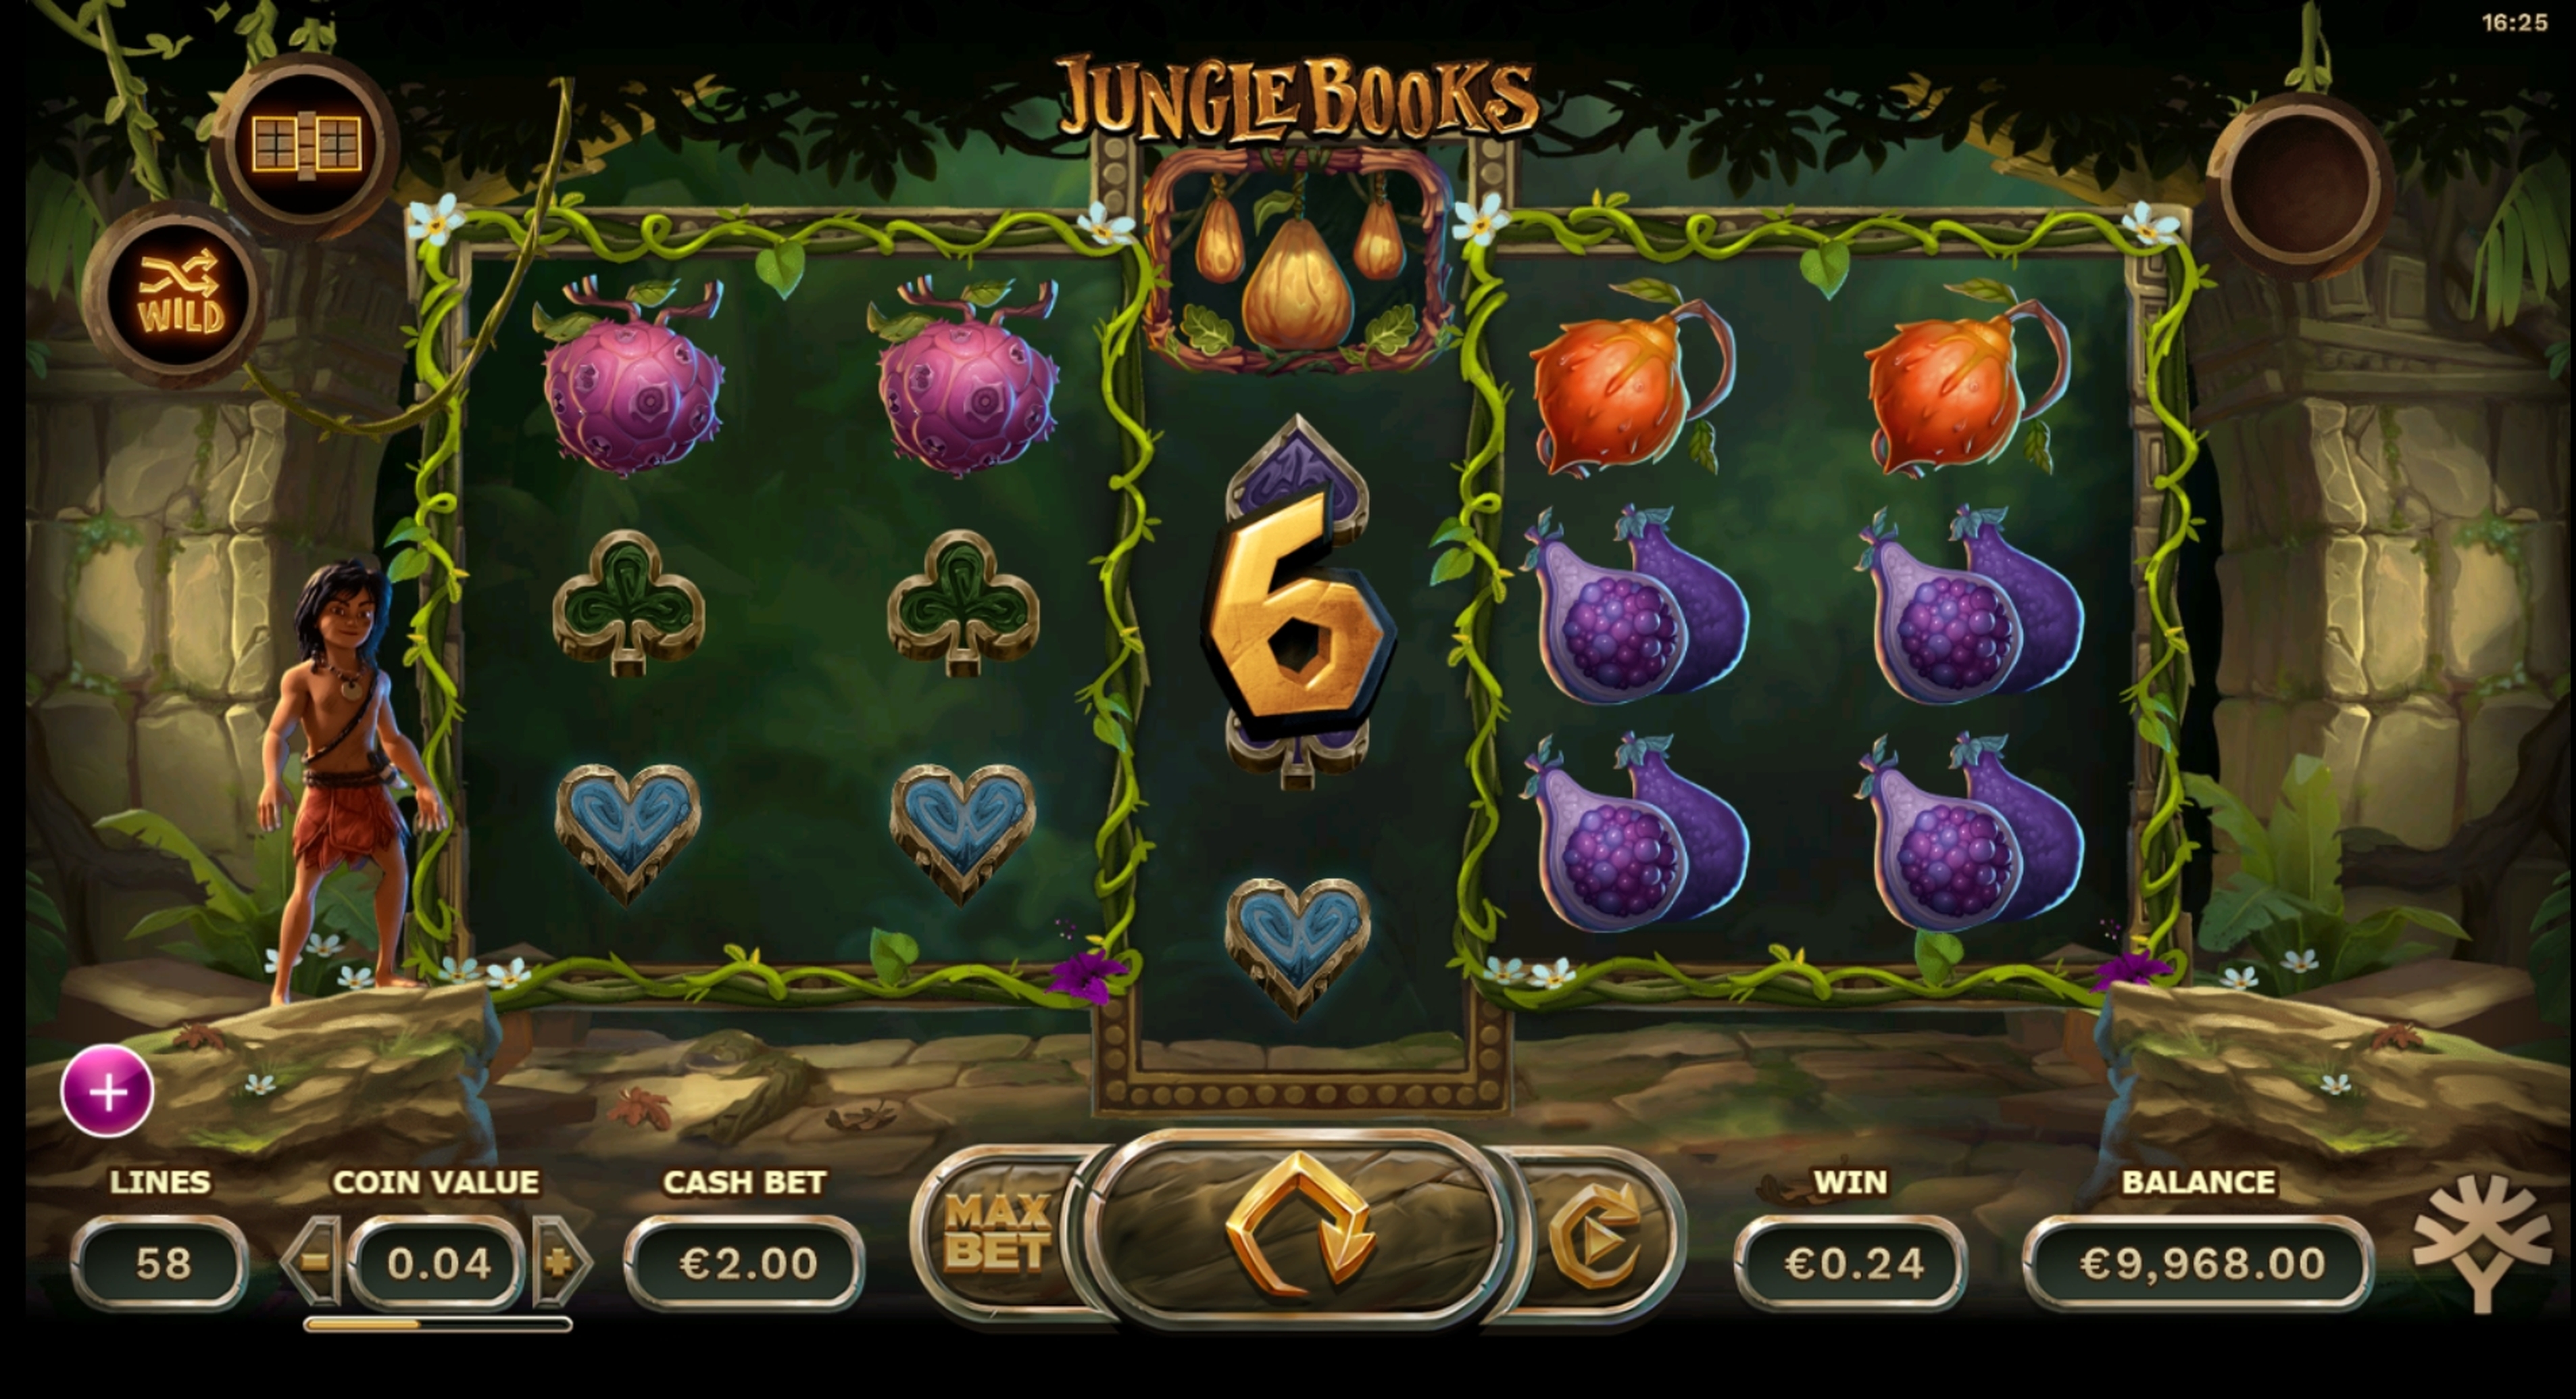 Win Money in Jungle Books Free Slot Game by Yggdrasil Gaming